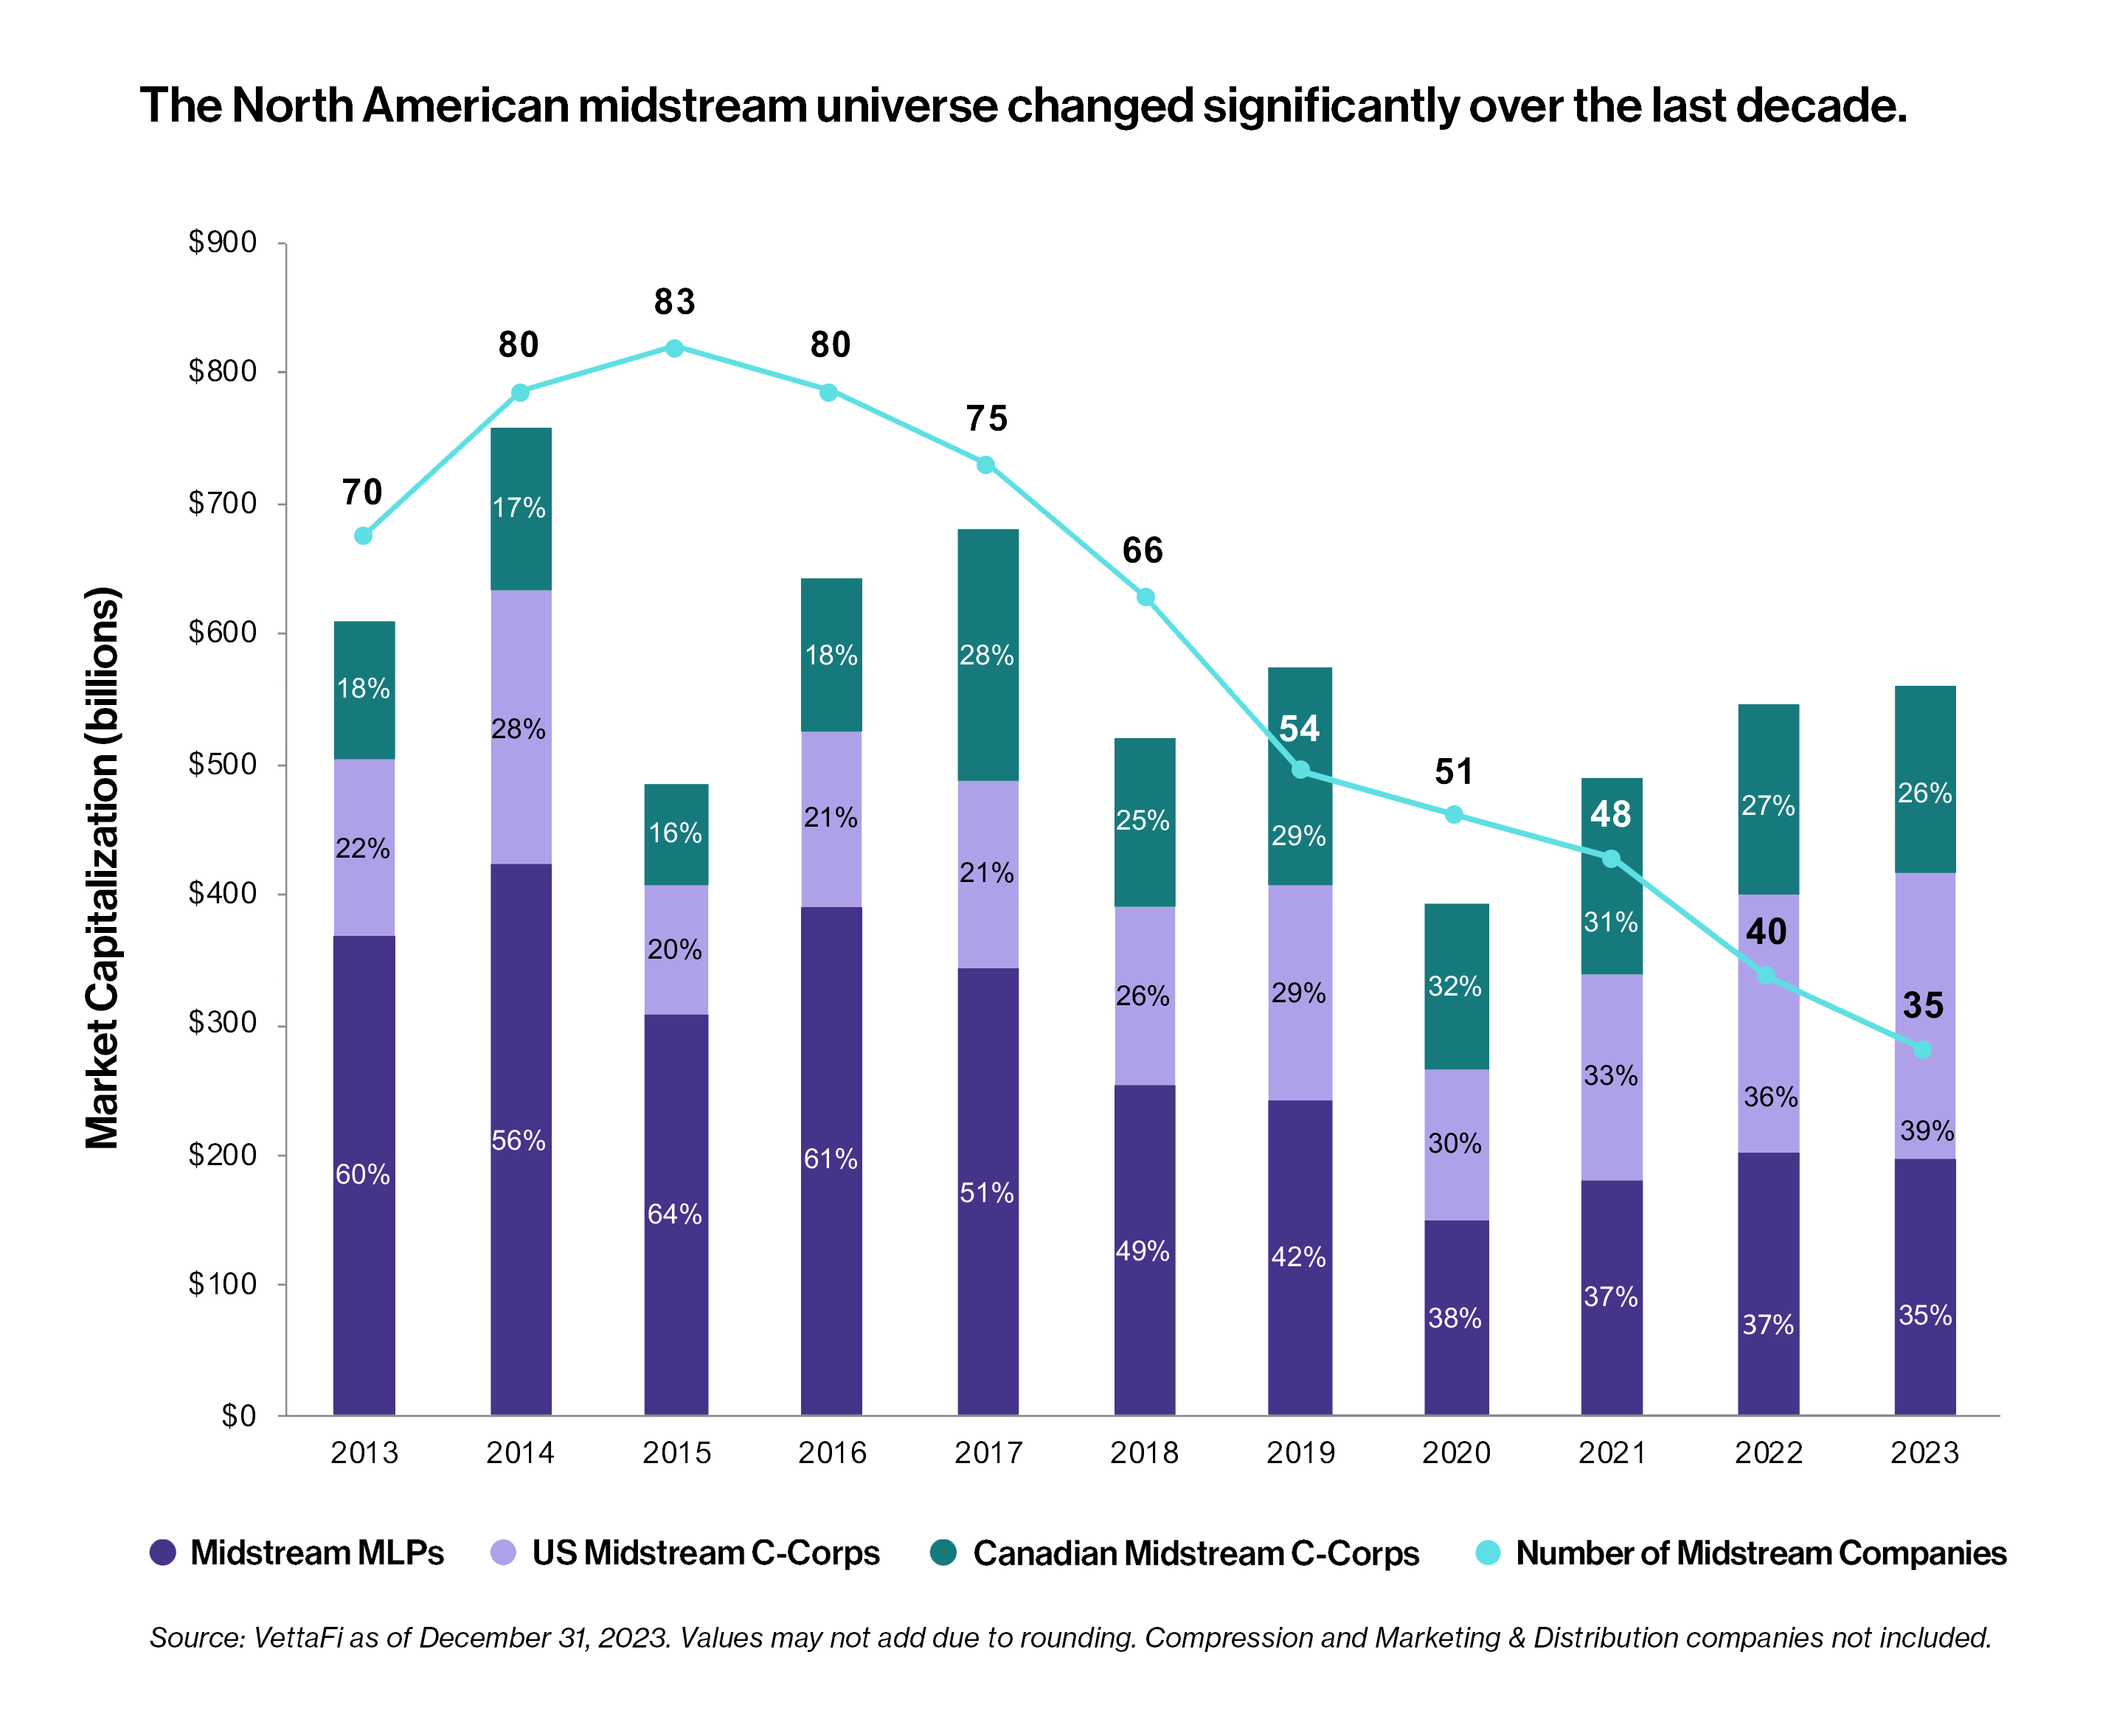 North American Midstream Universe Changed Greatly Over Last Decade